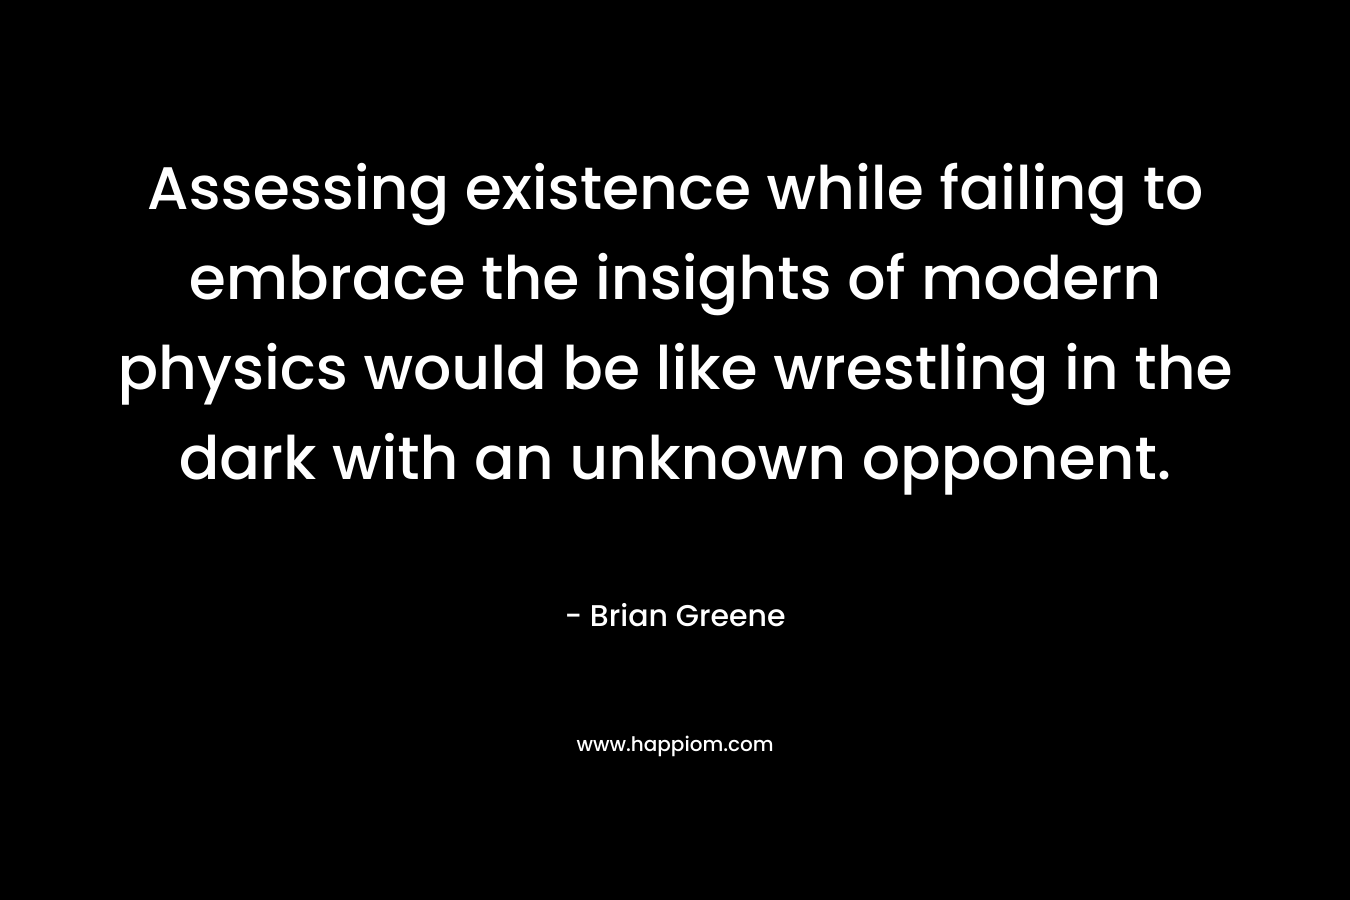 Assessing existence while failing to embrace the insights of modern physics would be like wrestling in the dark with an unknown opponent. – Brian Greene